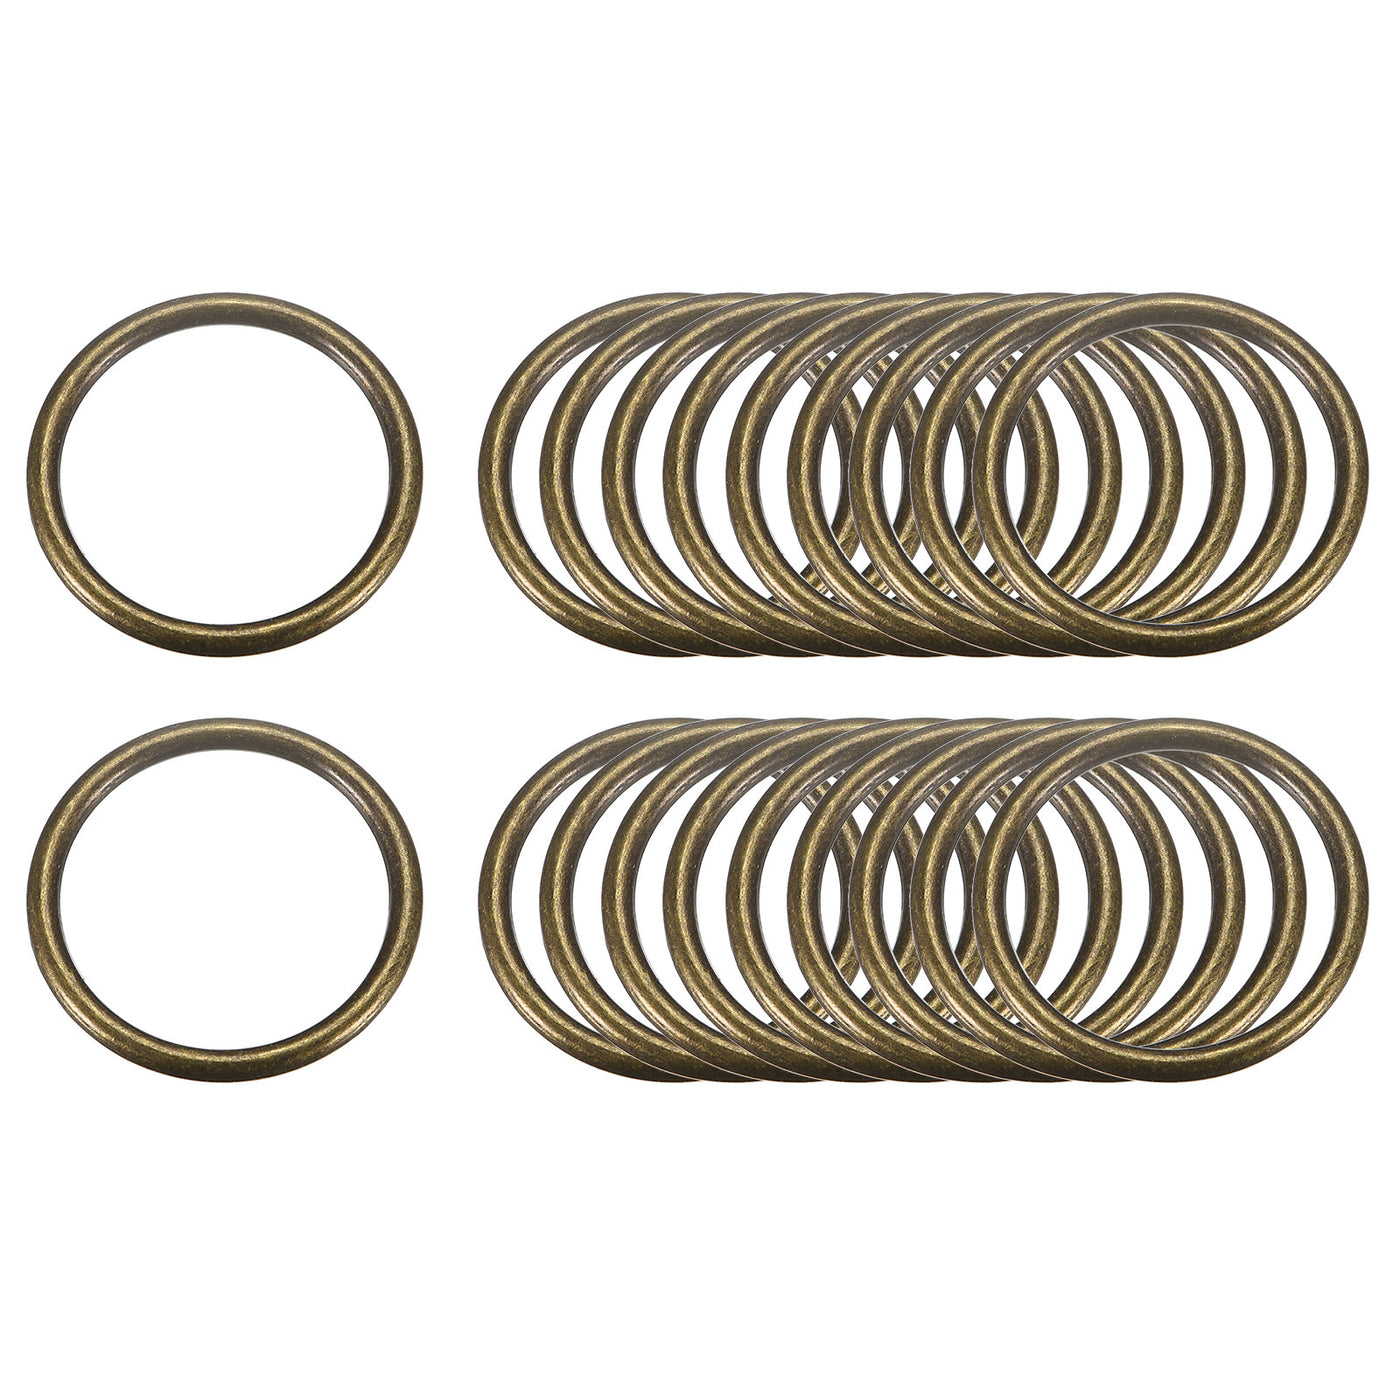 uxcell Uxcell Metal O Rings, 20pcs 30mm(1.18") ID 3mm Thick Welded O-Ringe, Bronze Tone